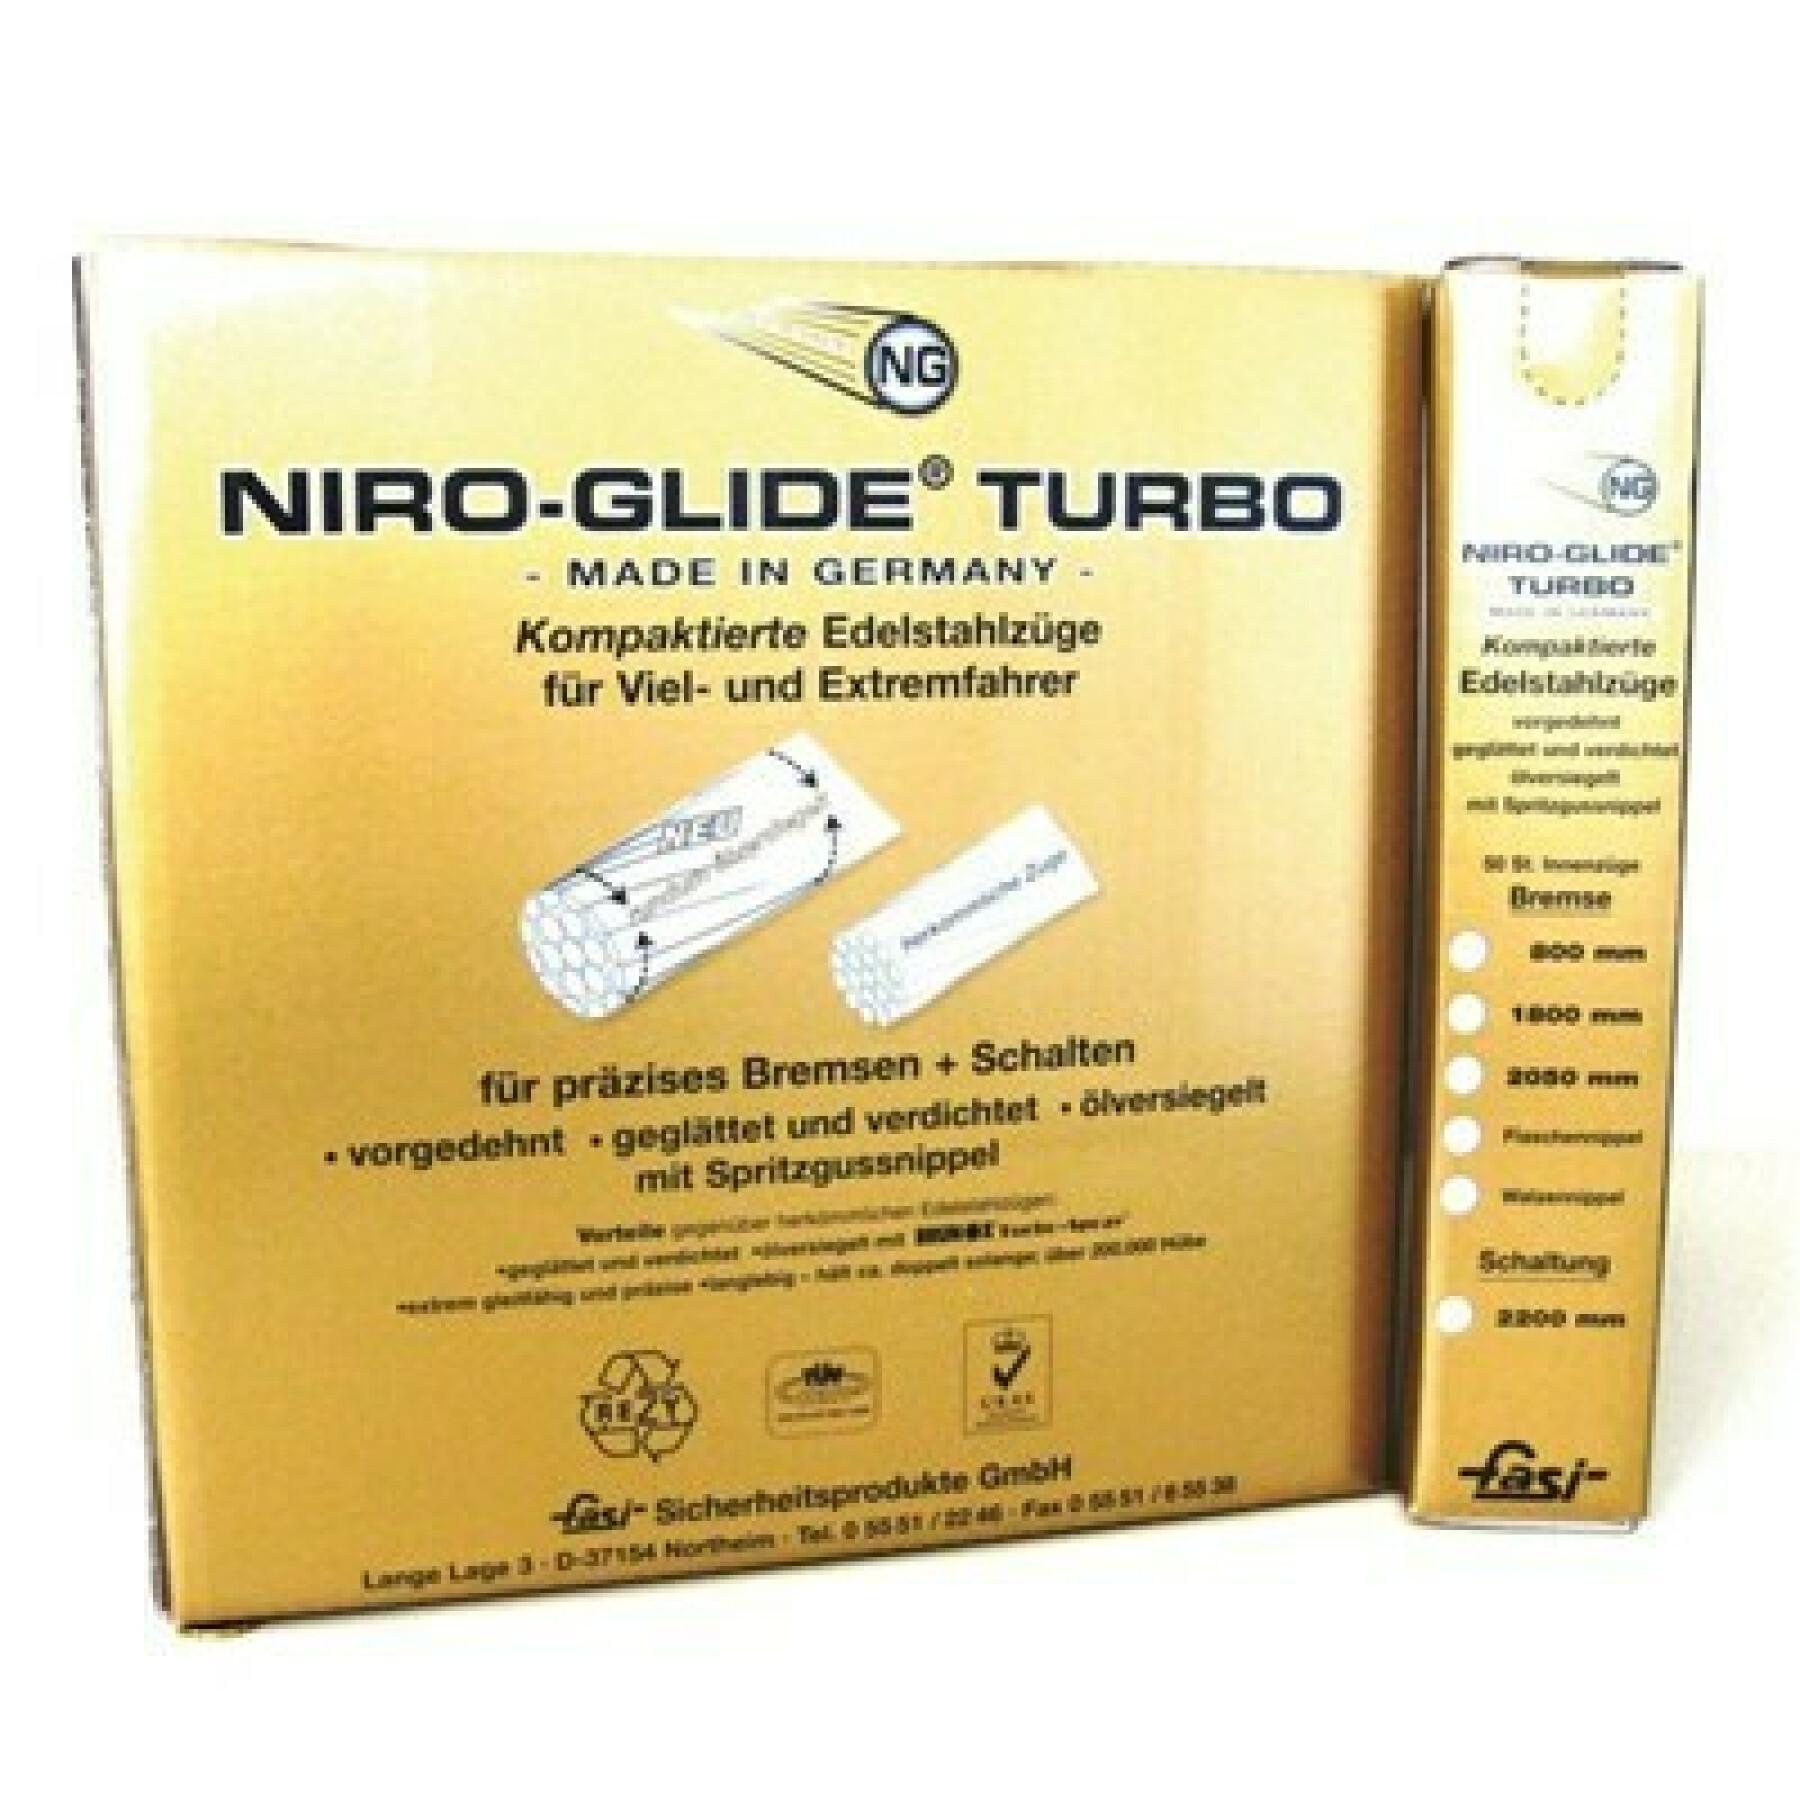 Box of 50 stainless steel brake cables Fasi Niro Glide Turbo Mtb 2050 Mmx1.5 mm